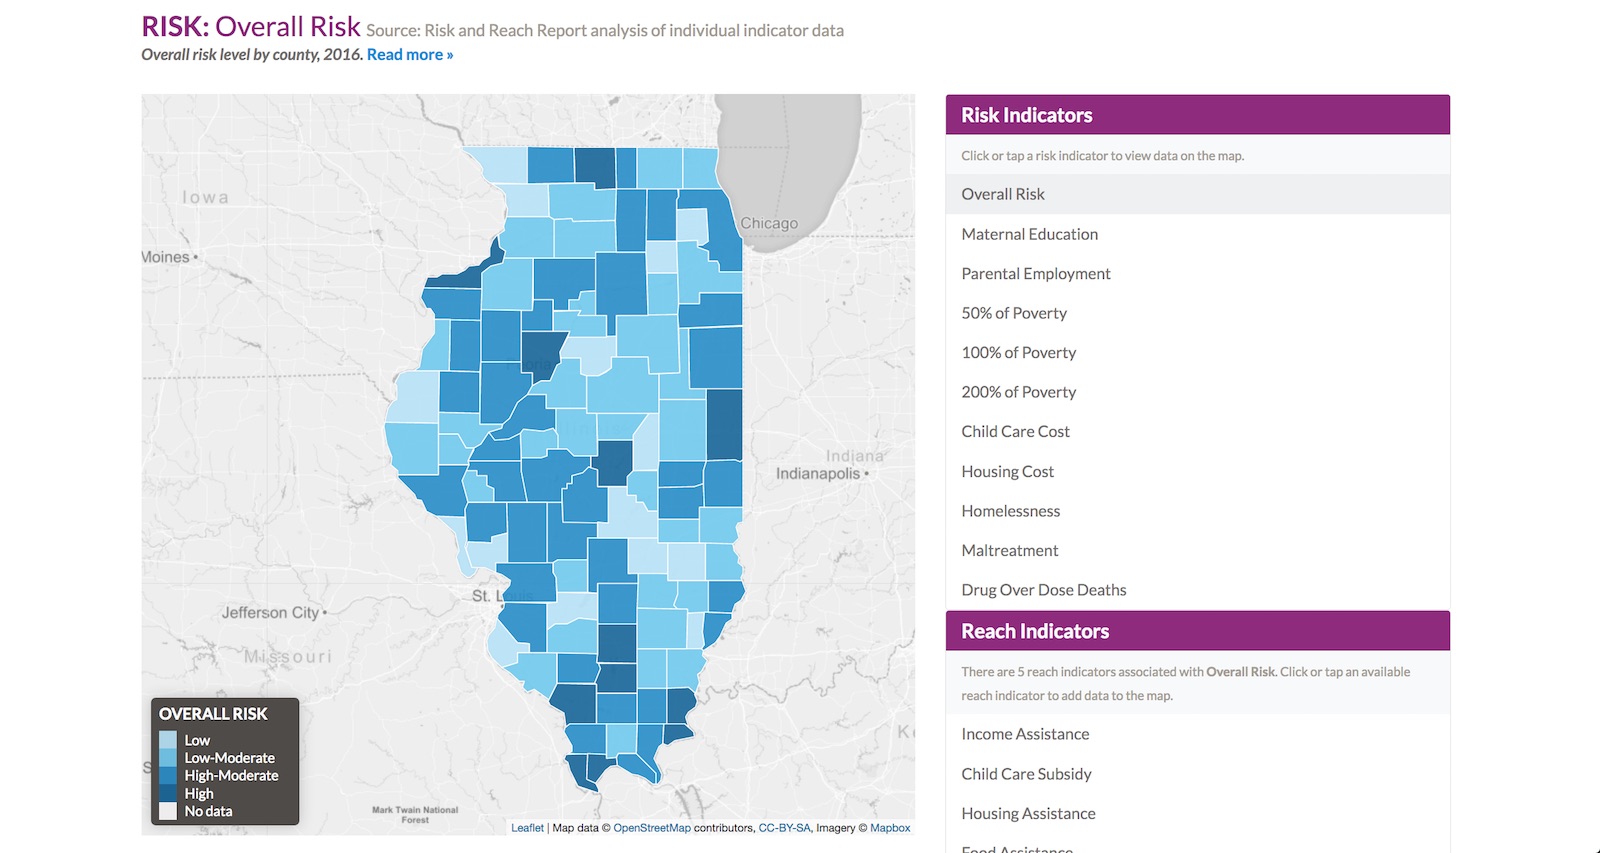 Illinois Risk and Reach Report - Overall risk by county